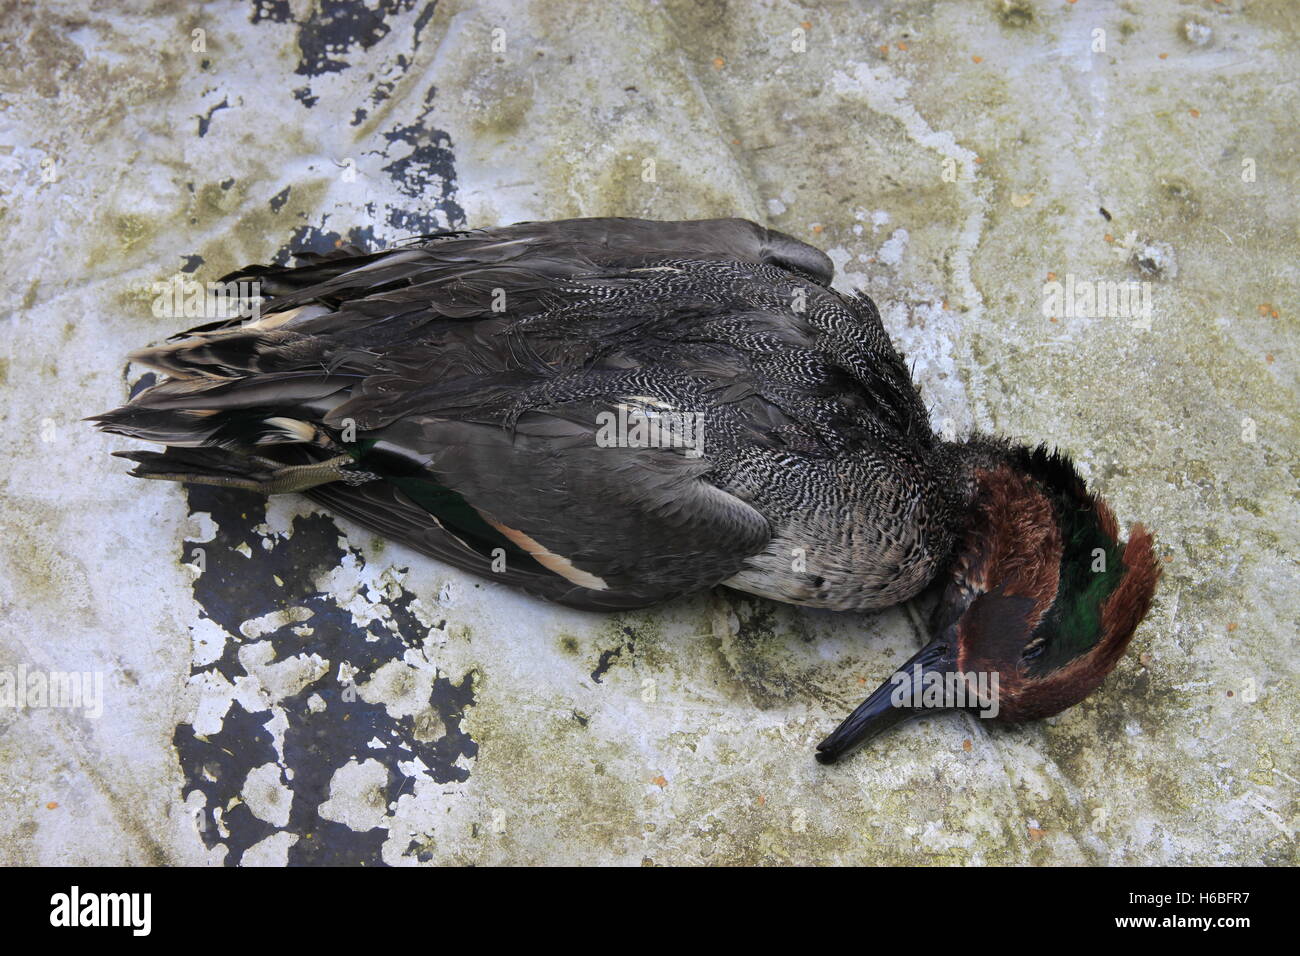 Teal duck wild game bird recently shot showing plumage feathers on metal table Stock Photo